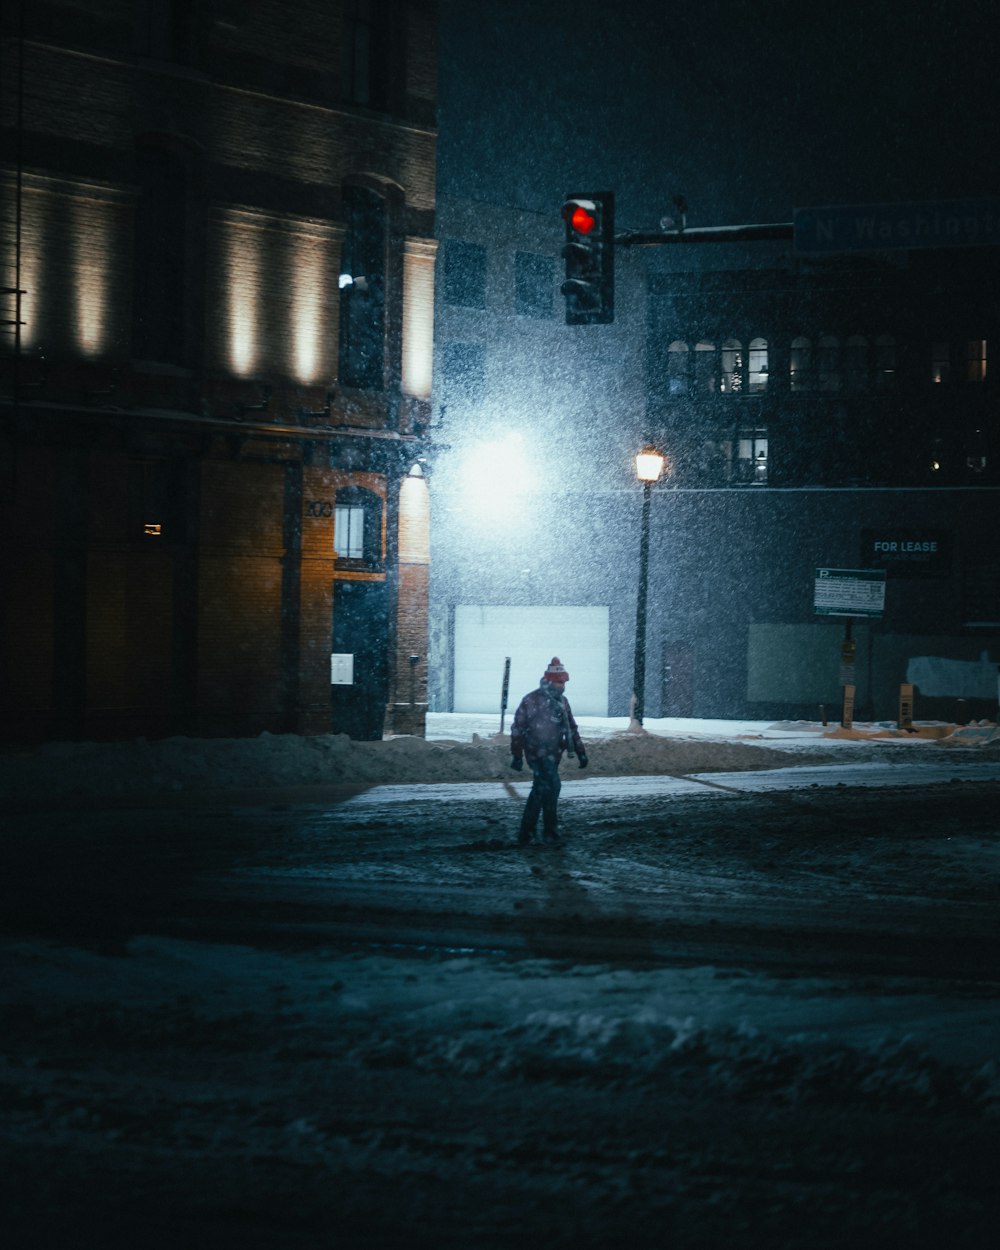 person walking on street during night time